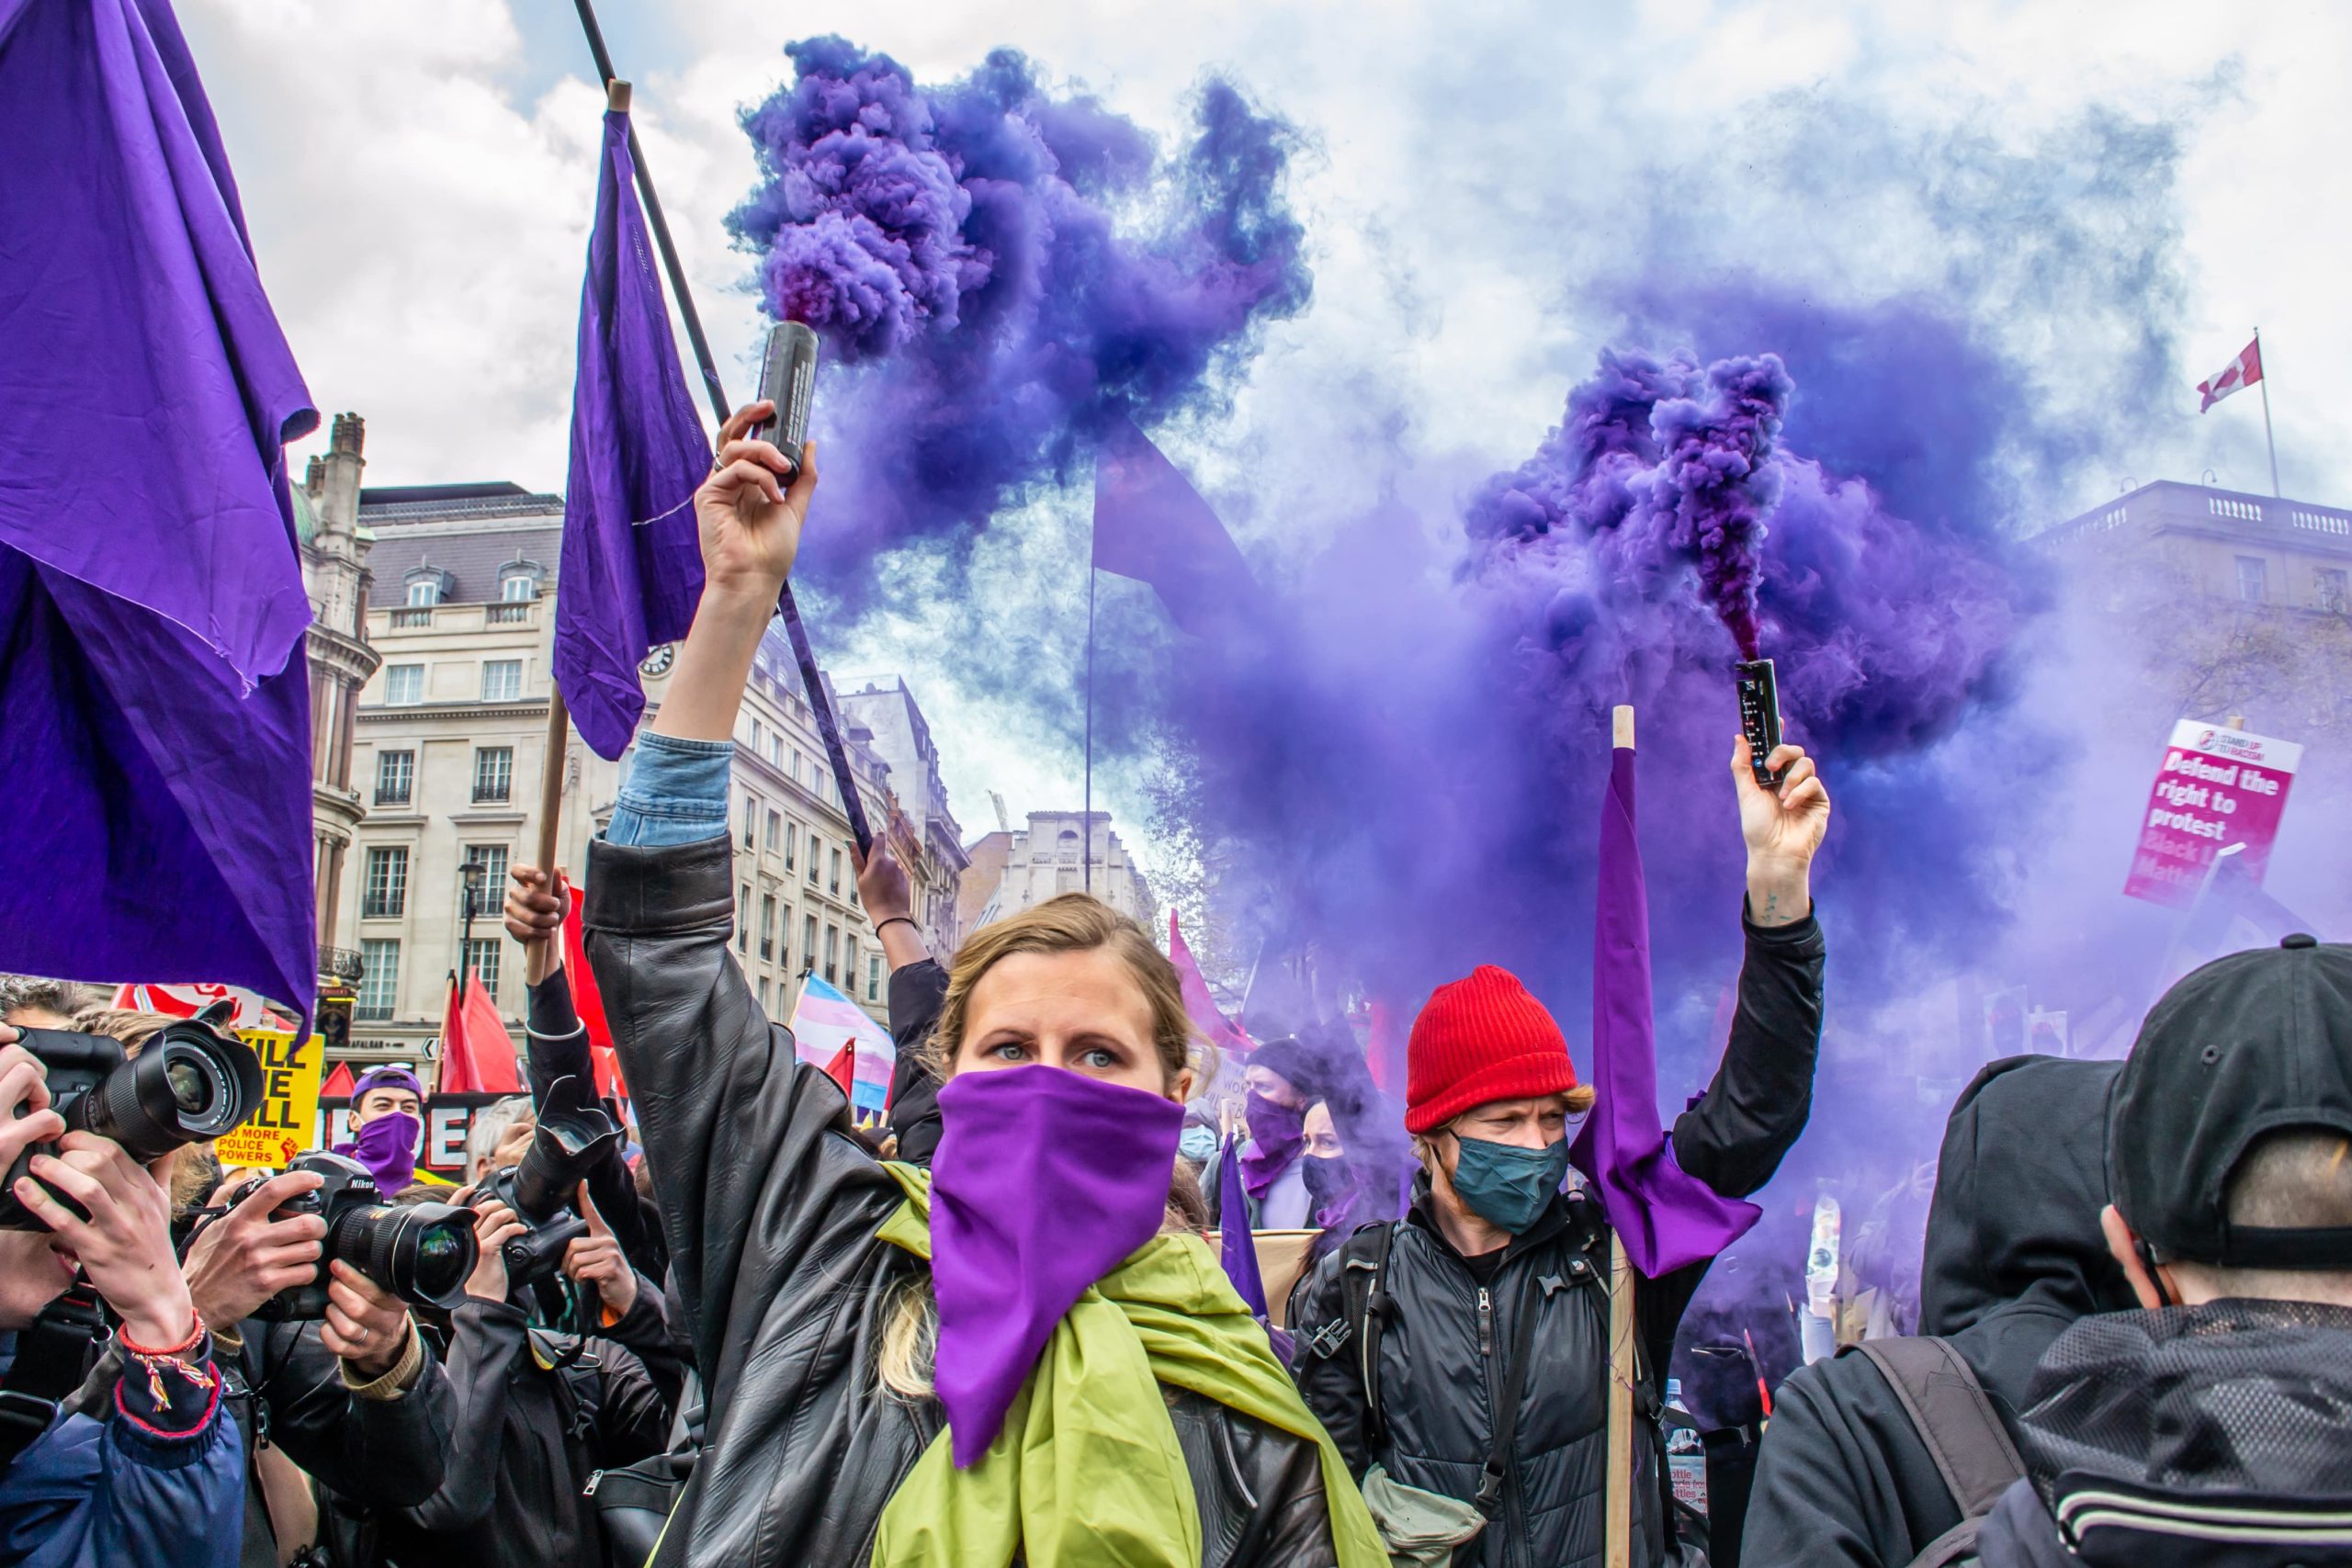 Source: Shutterstock, Jessica Girvan, Protesters at a KILL THE BILL protest, London, UK, May 1, 2021